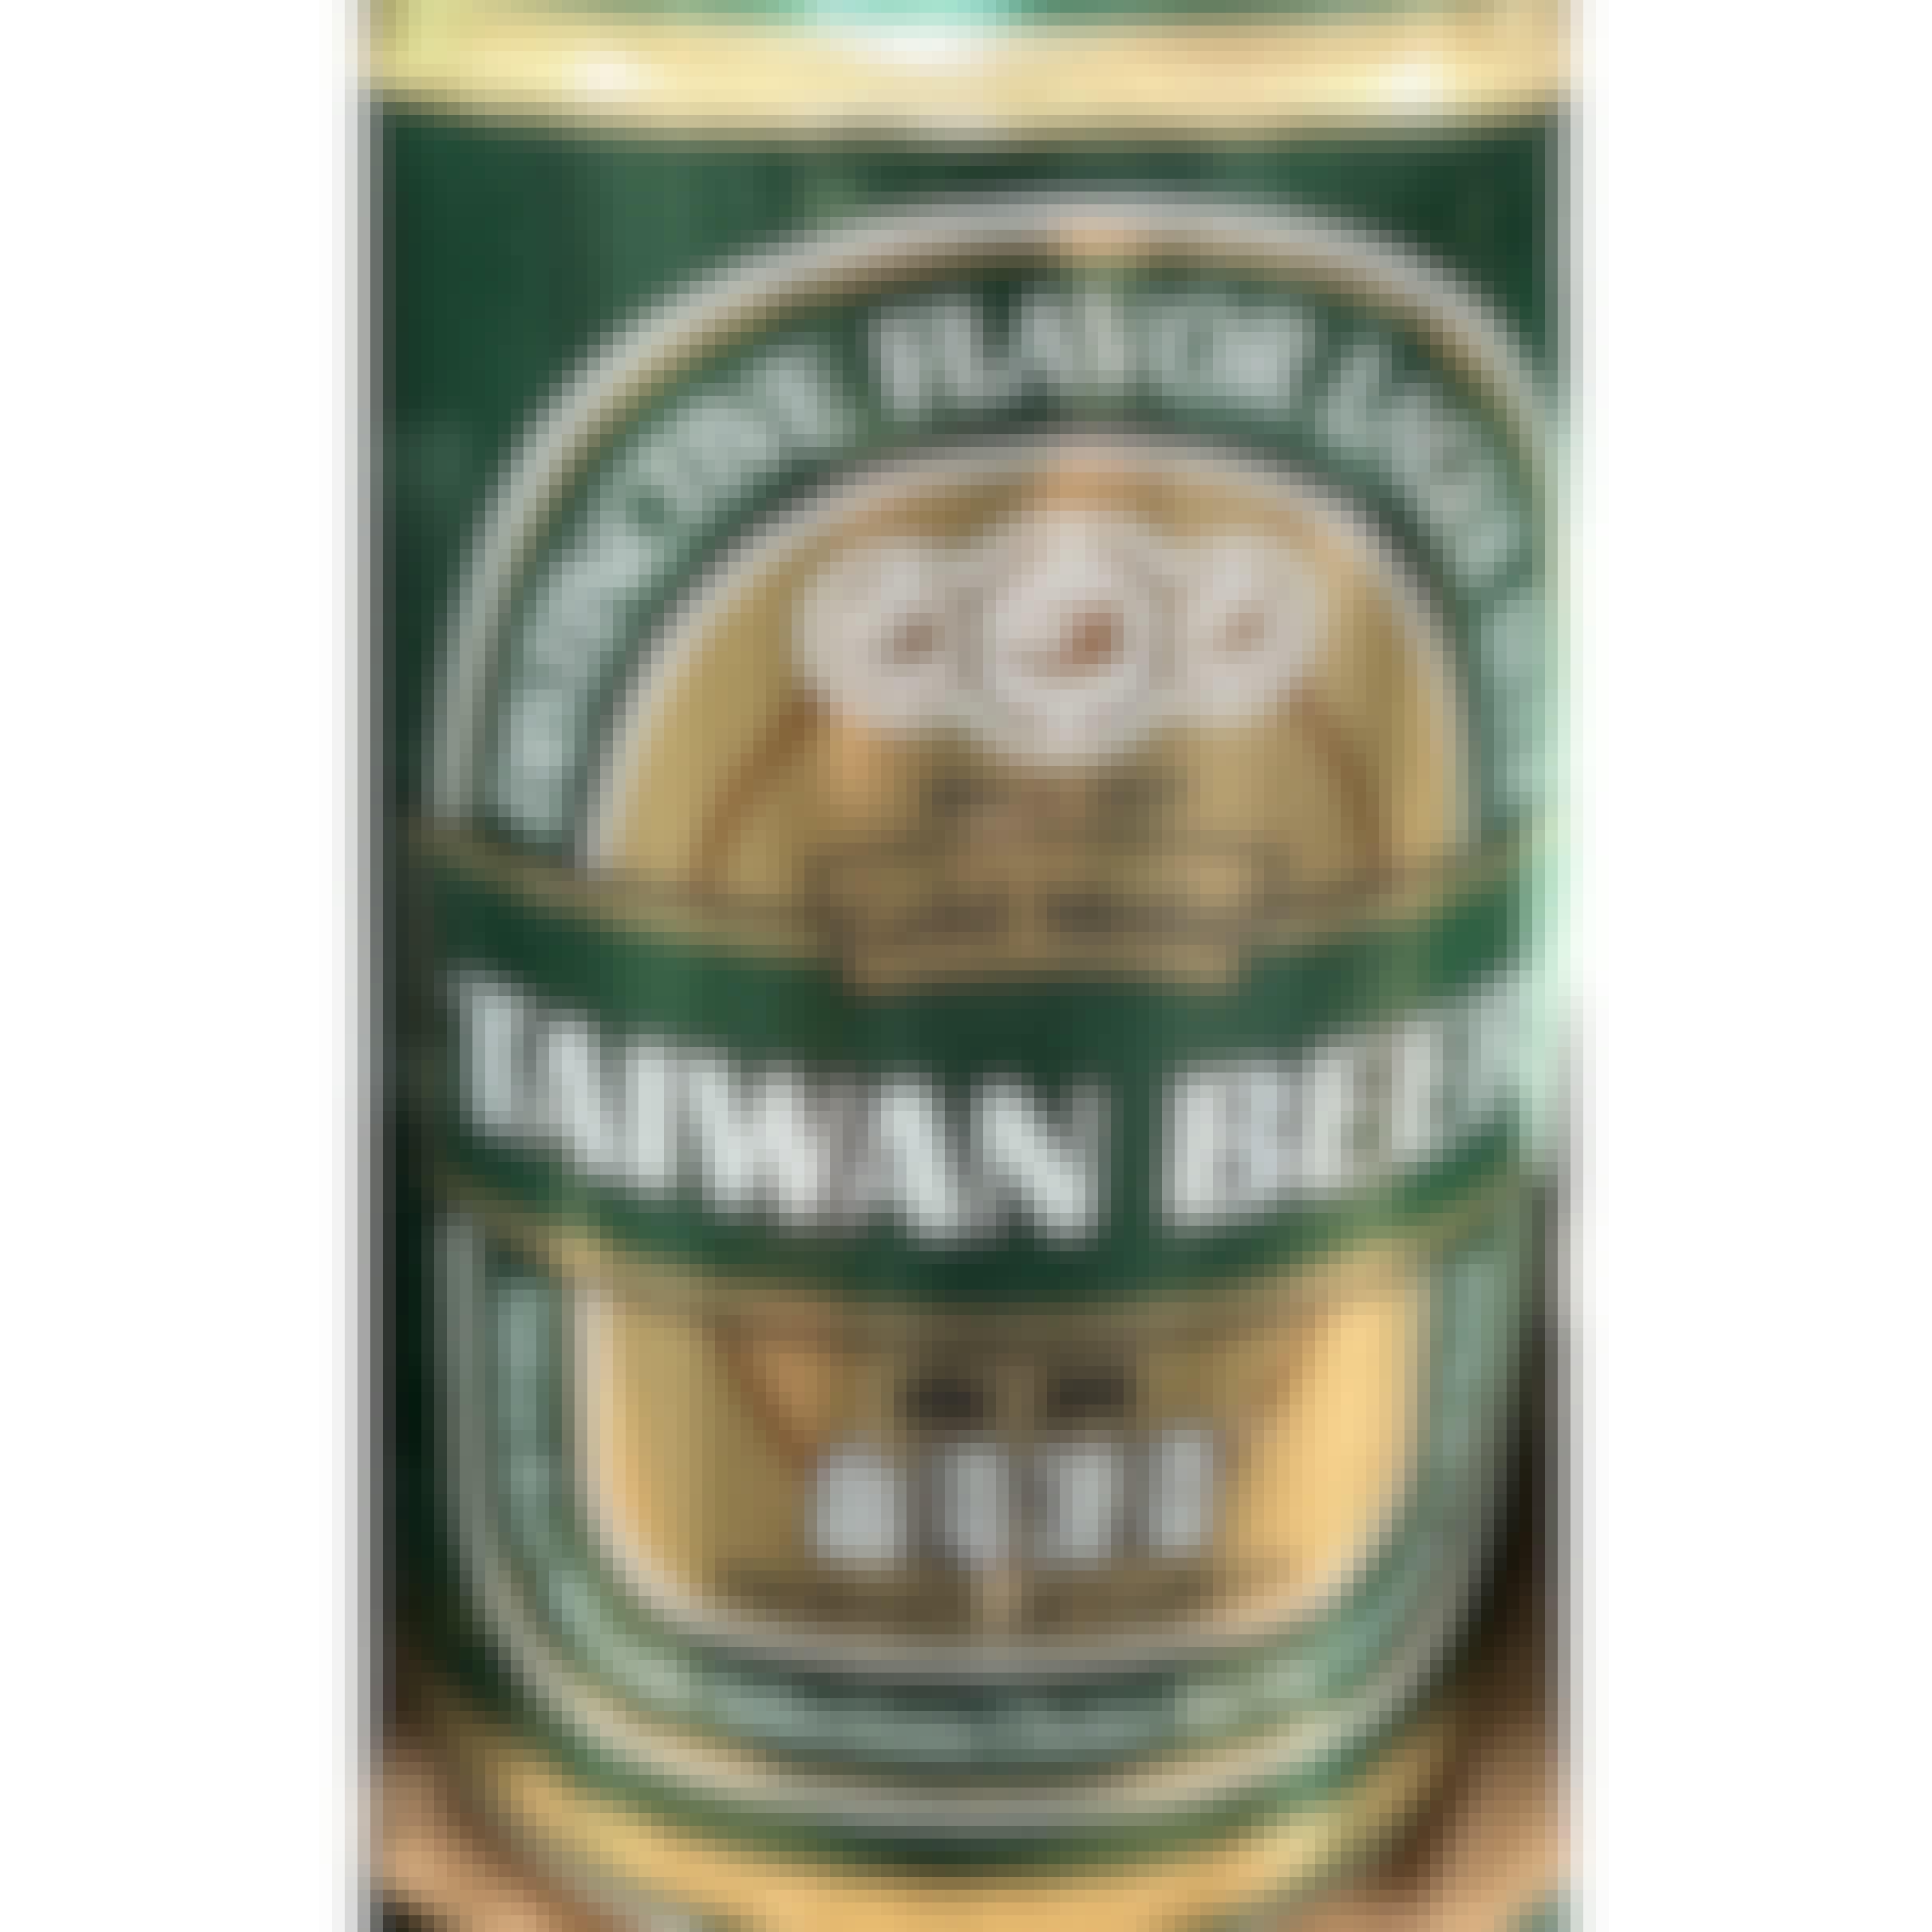 Taiwan Taiwan Beer Gold Medal  6 pack 330ml Can